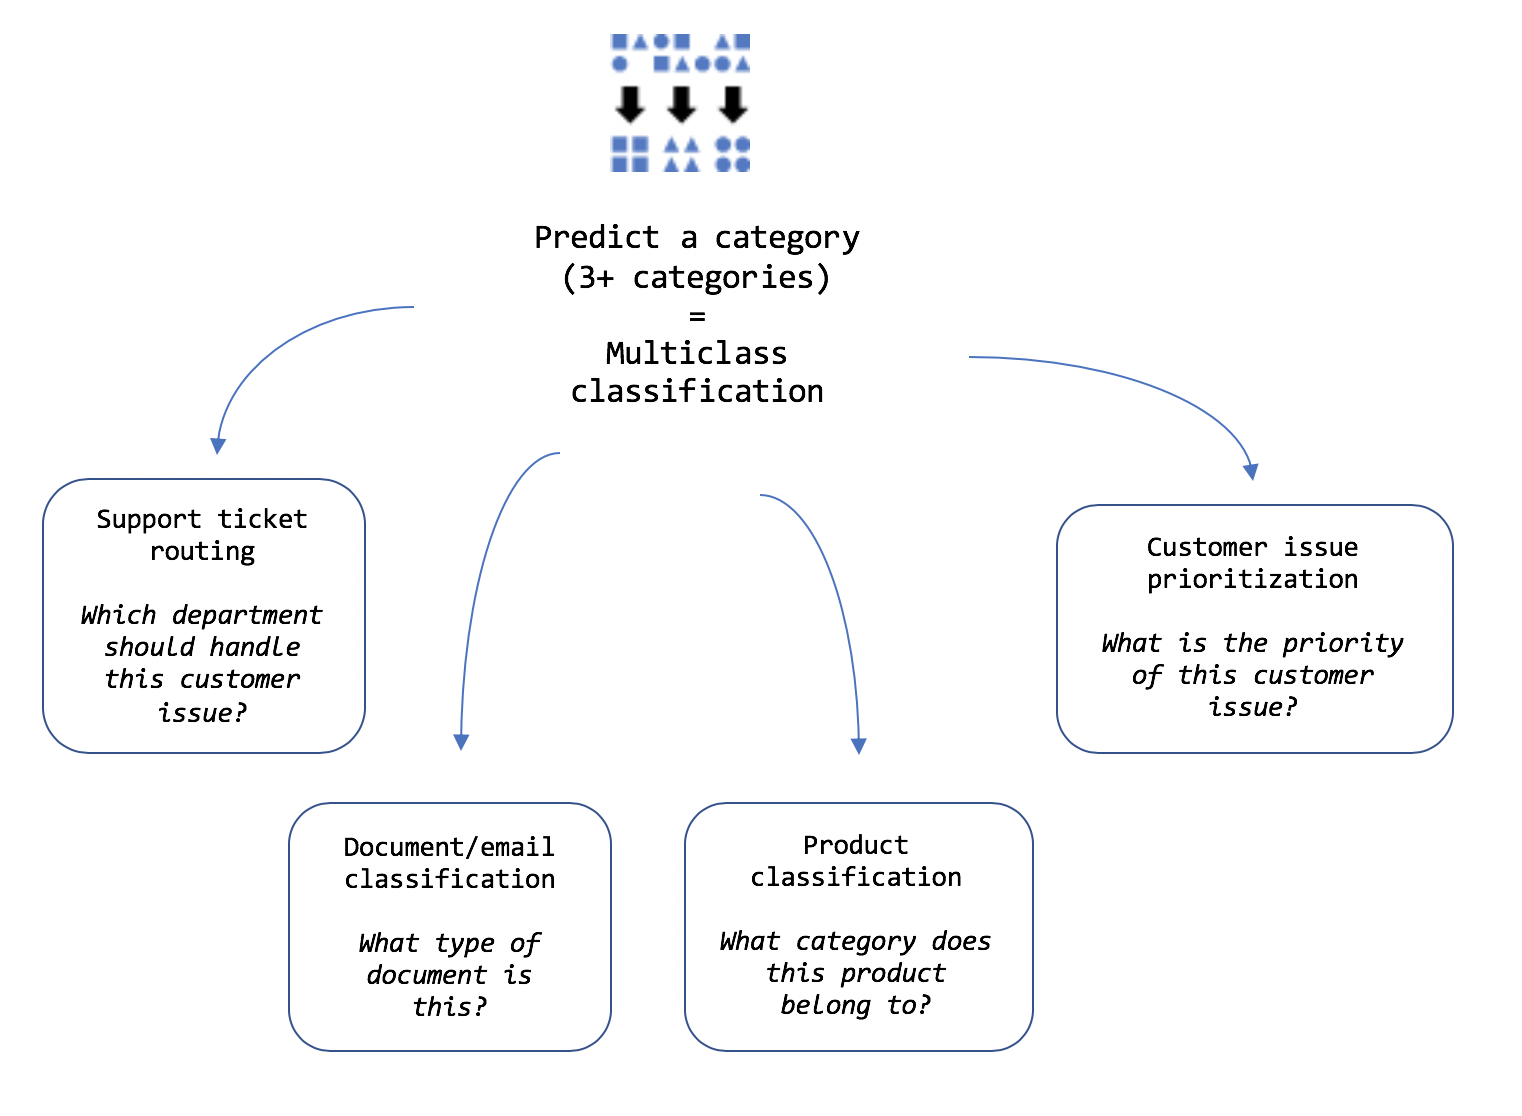 Examples of multiclass classification including document and product classification, support ticket routing, and customer issue prioritization